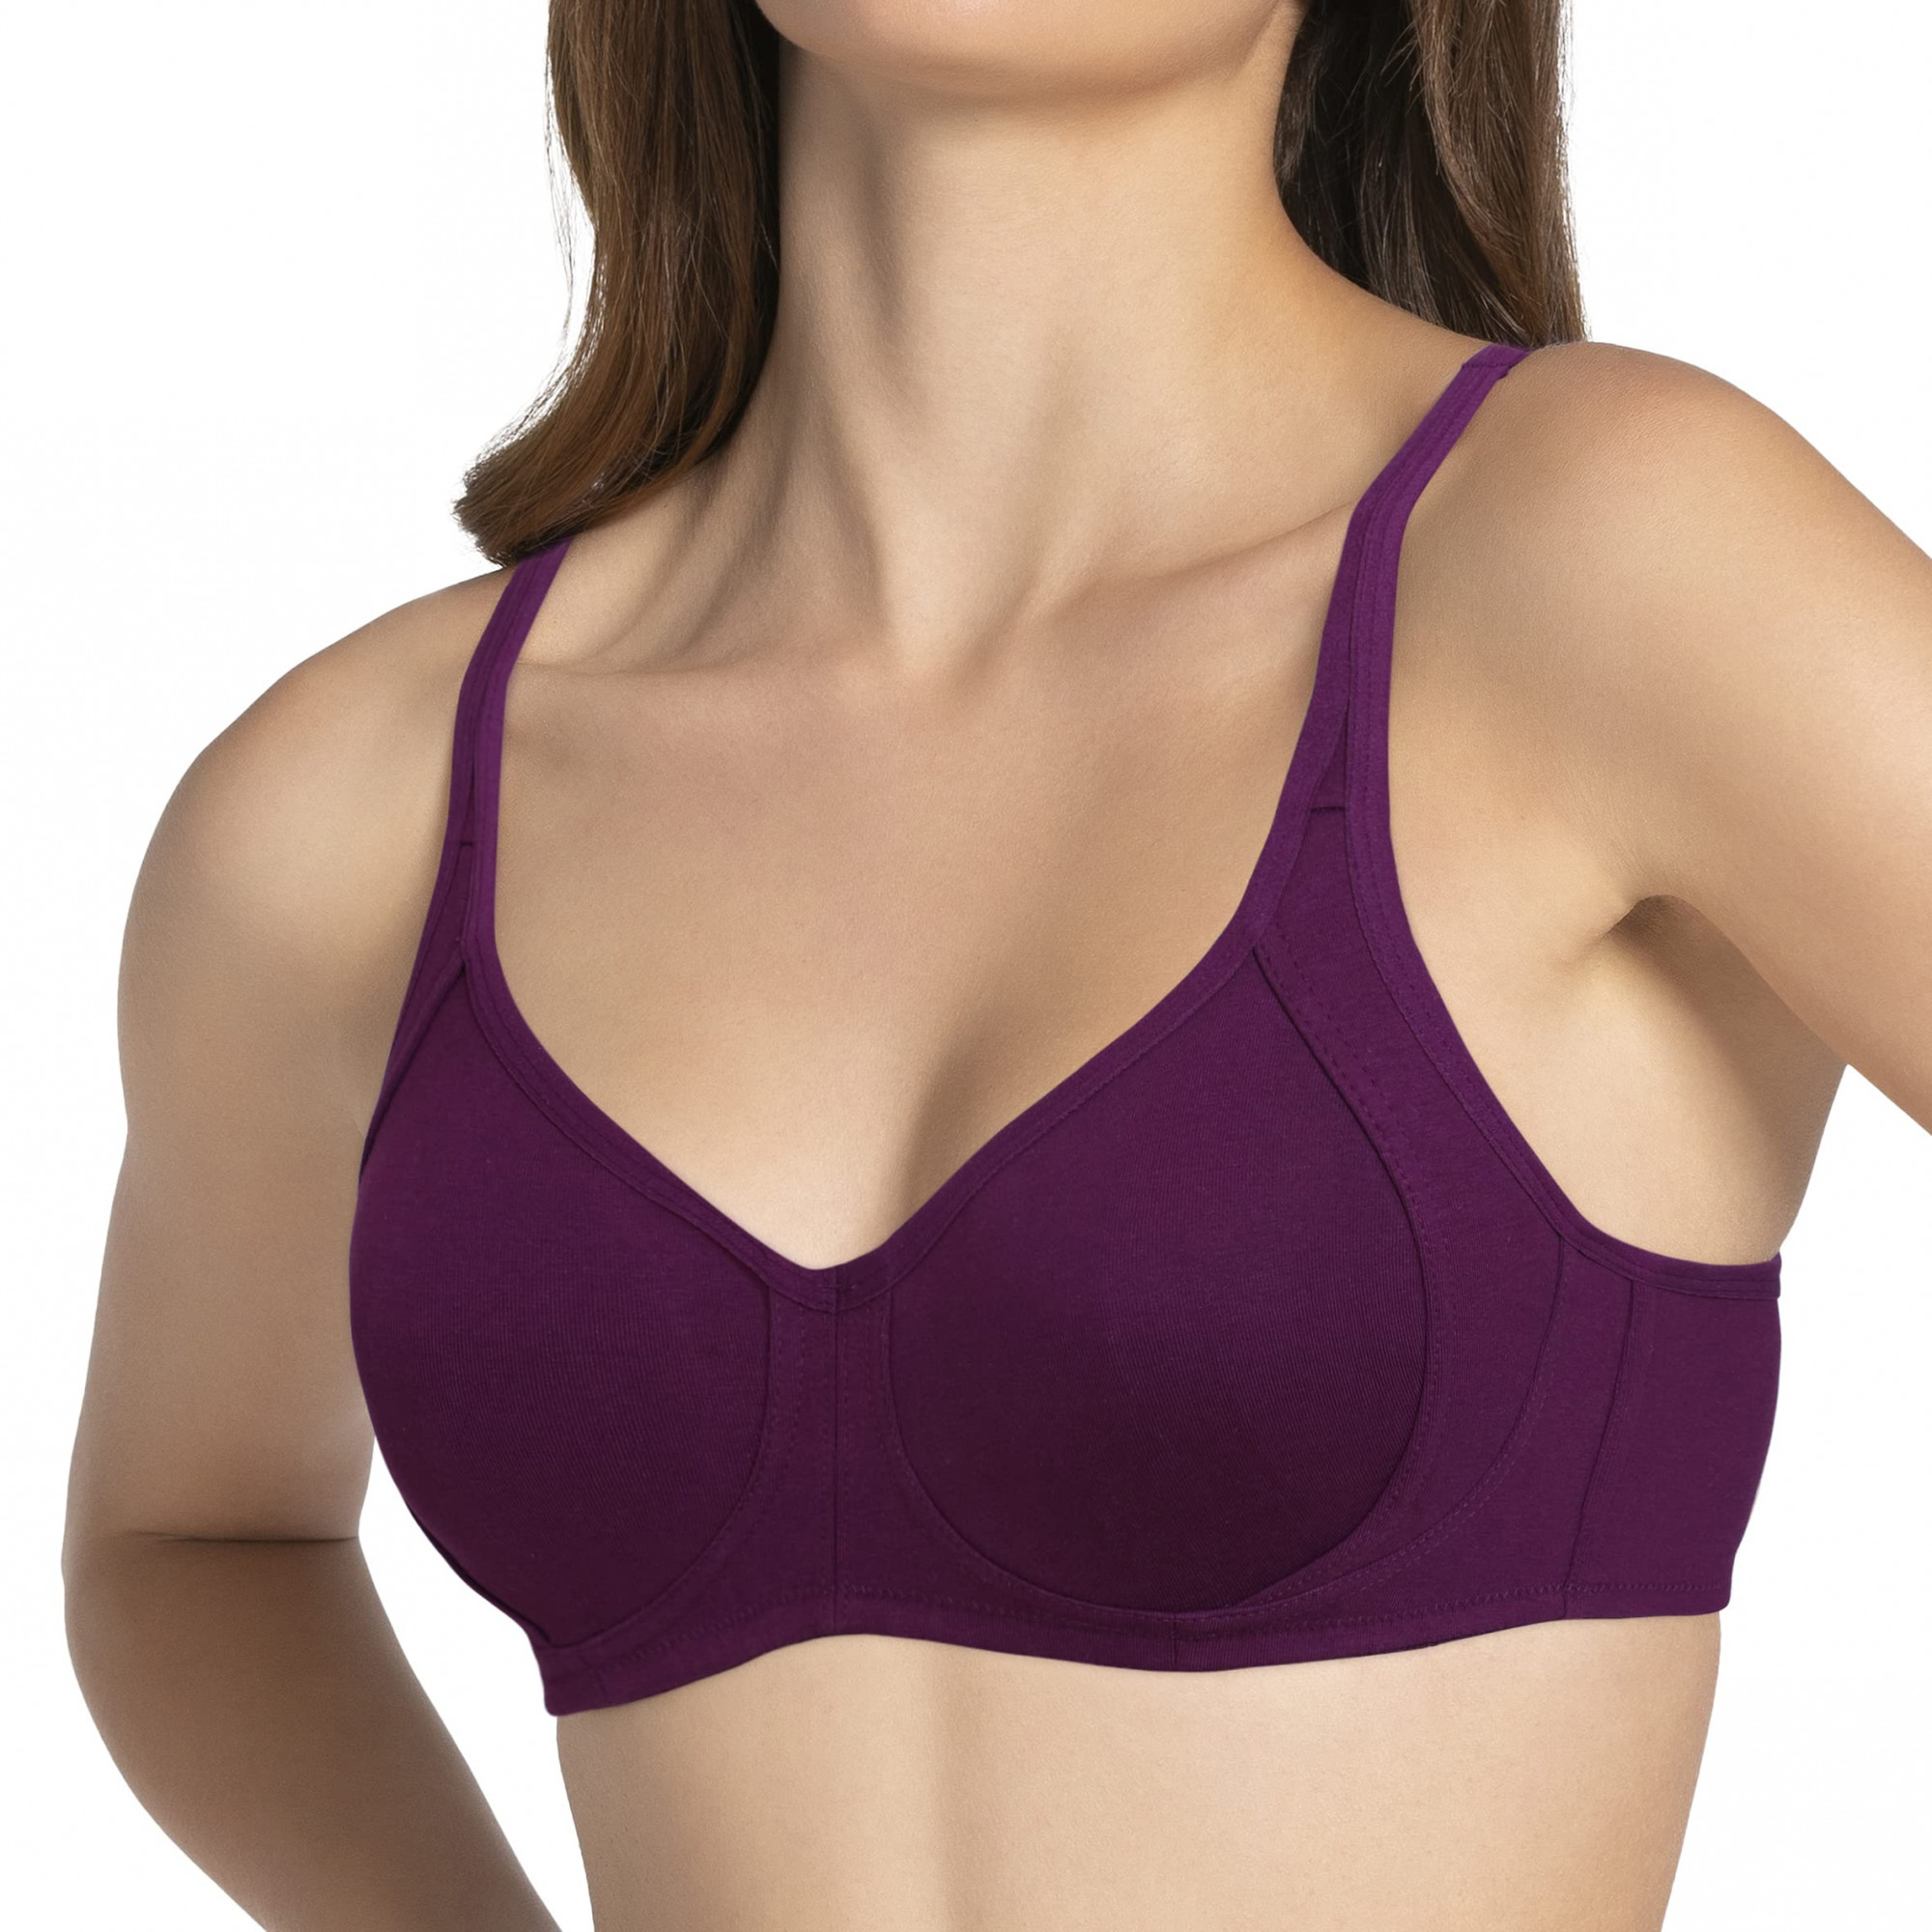 Amante Cotton 32A Push Up Bra in Valsad - Dealers, Manufacturers